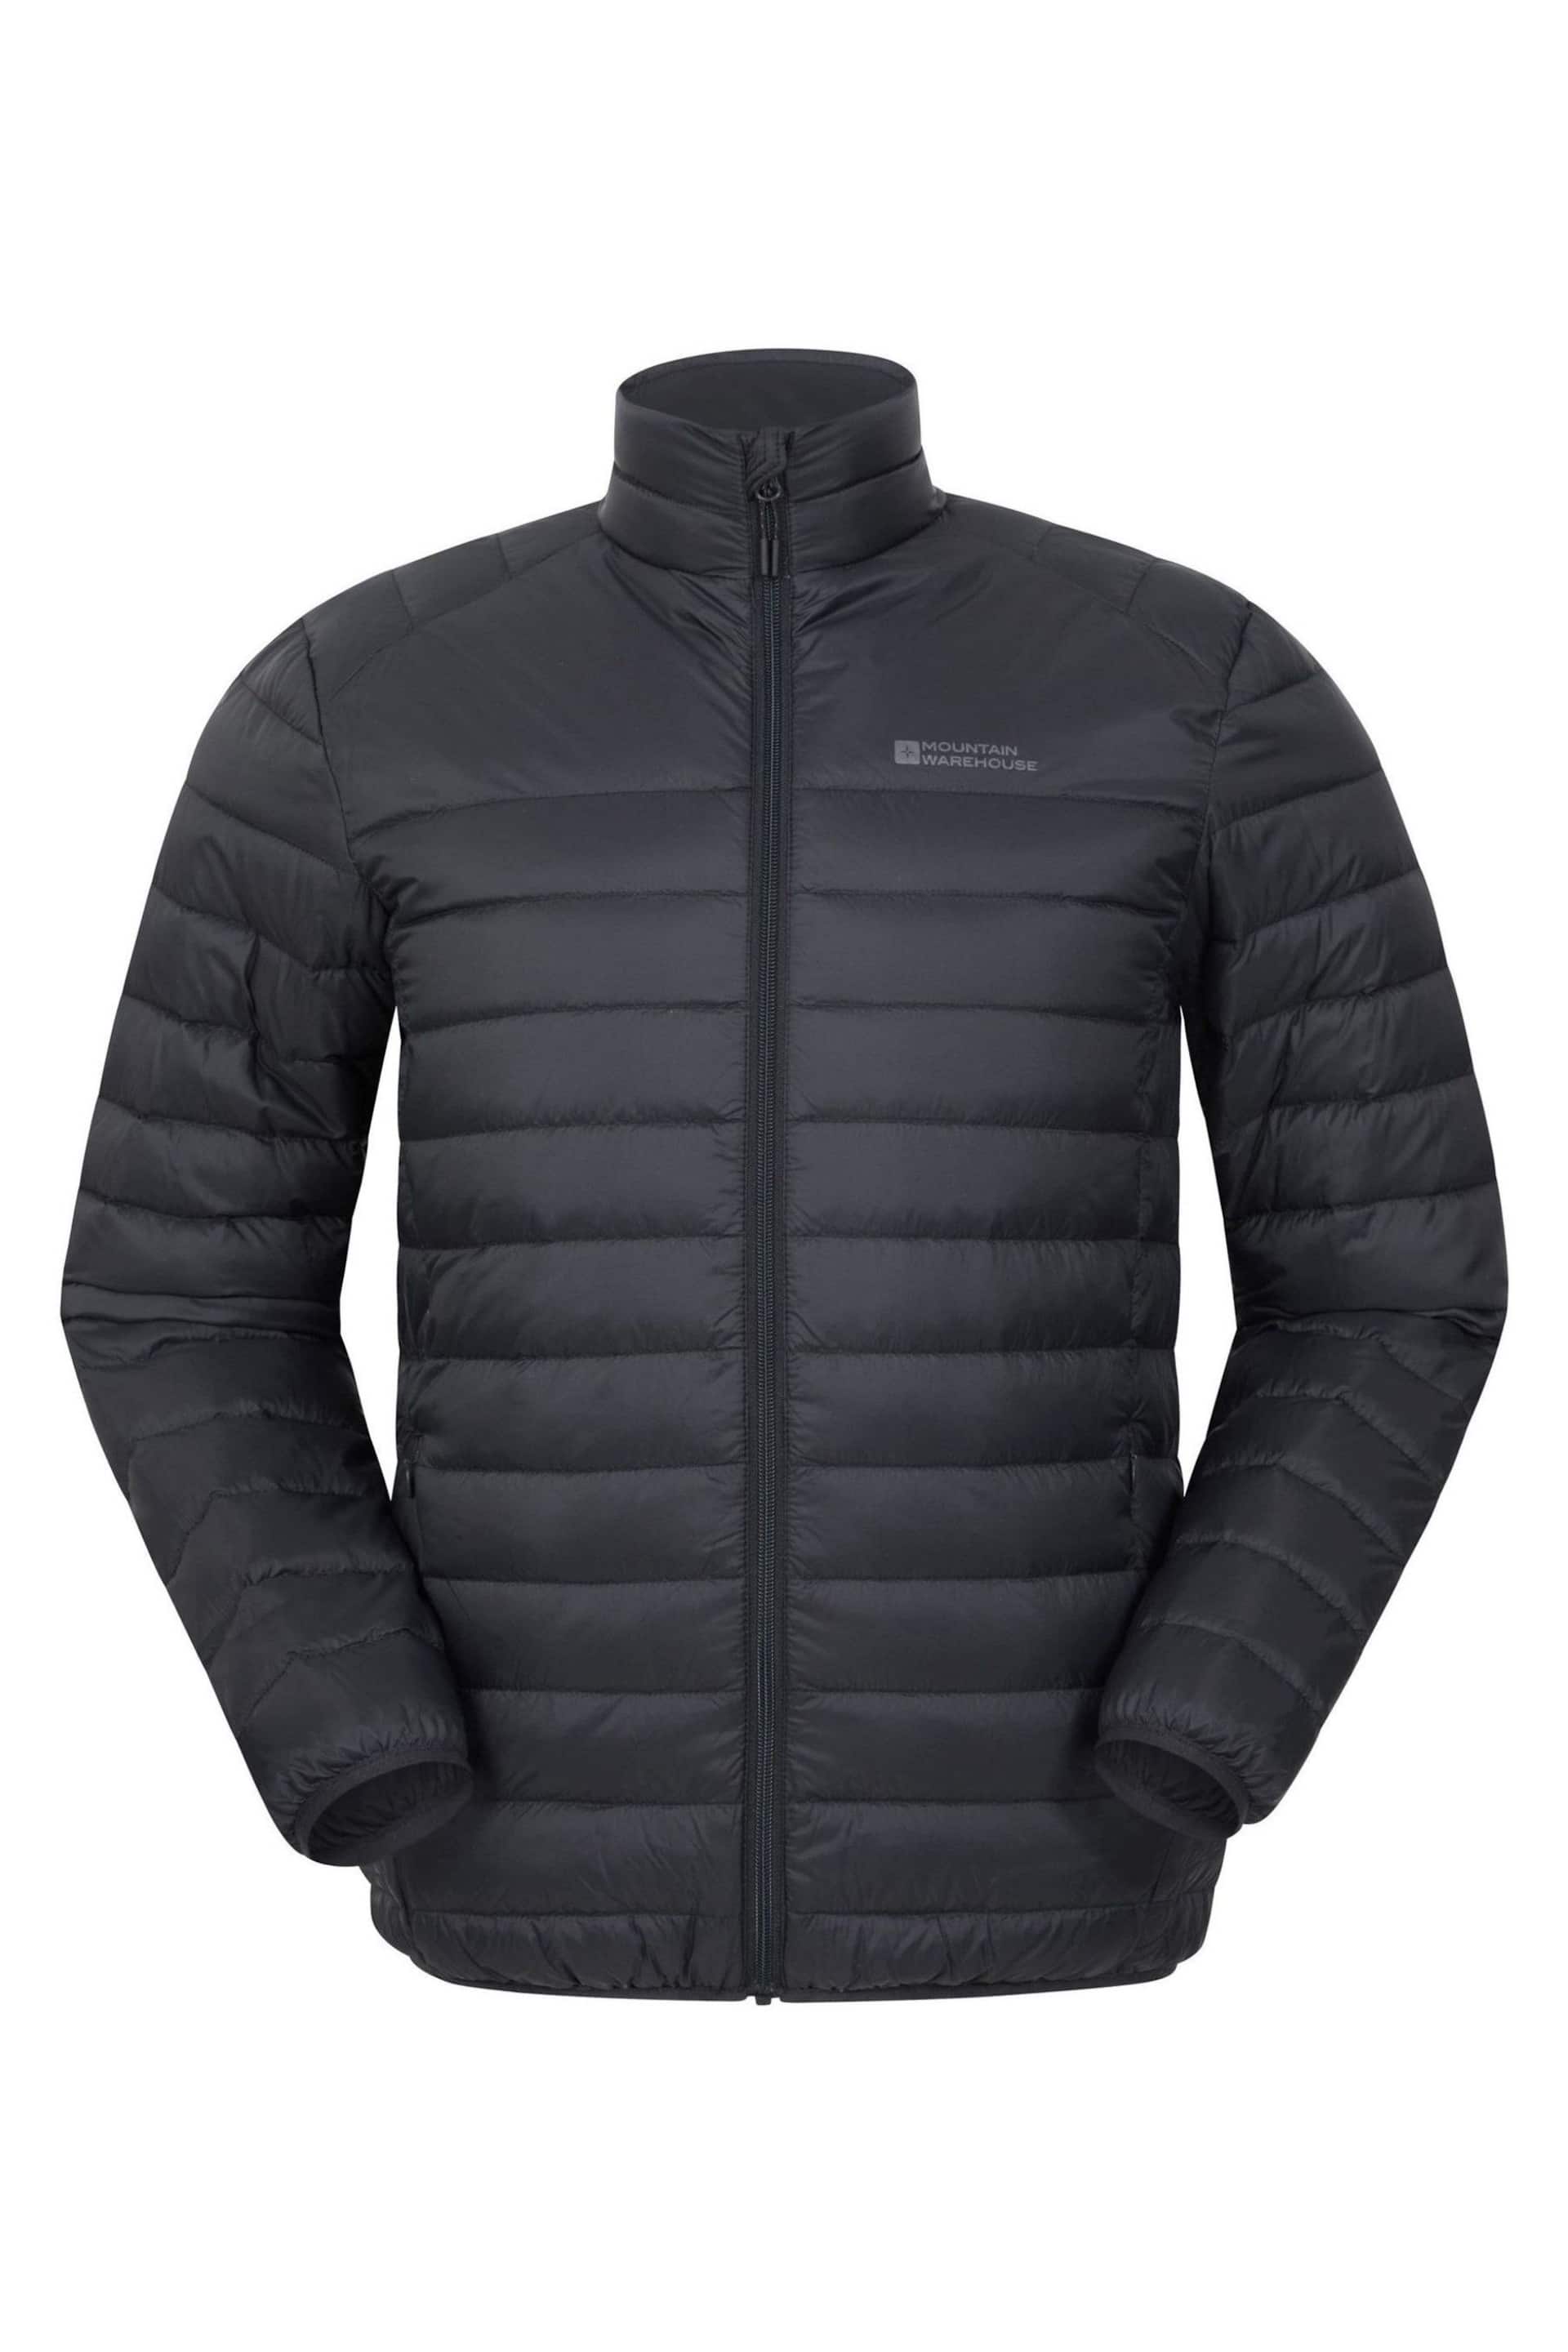 Mountain Warehouse Black Featherweight Down Mens Jacket - Image 2 of 5